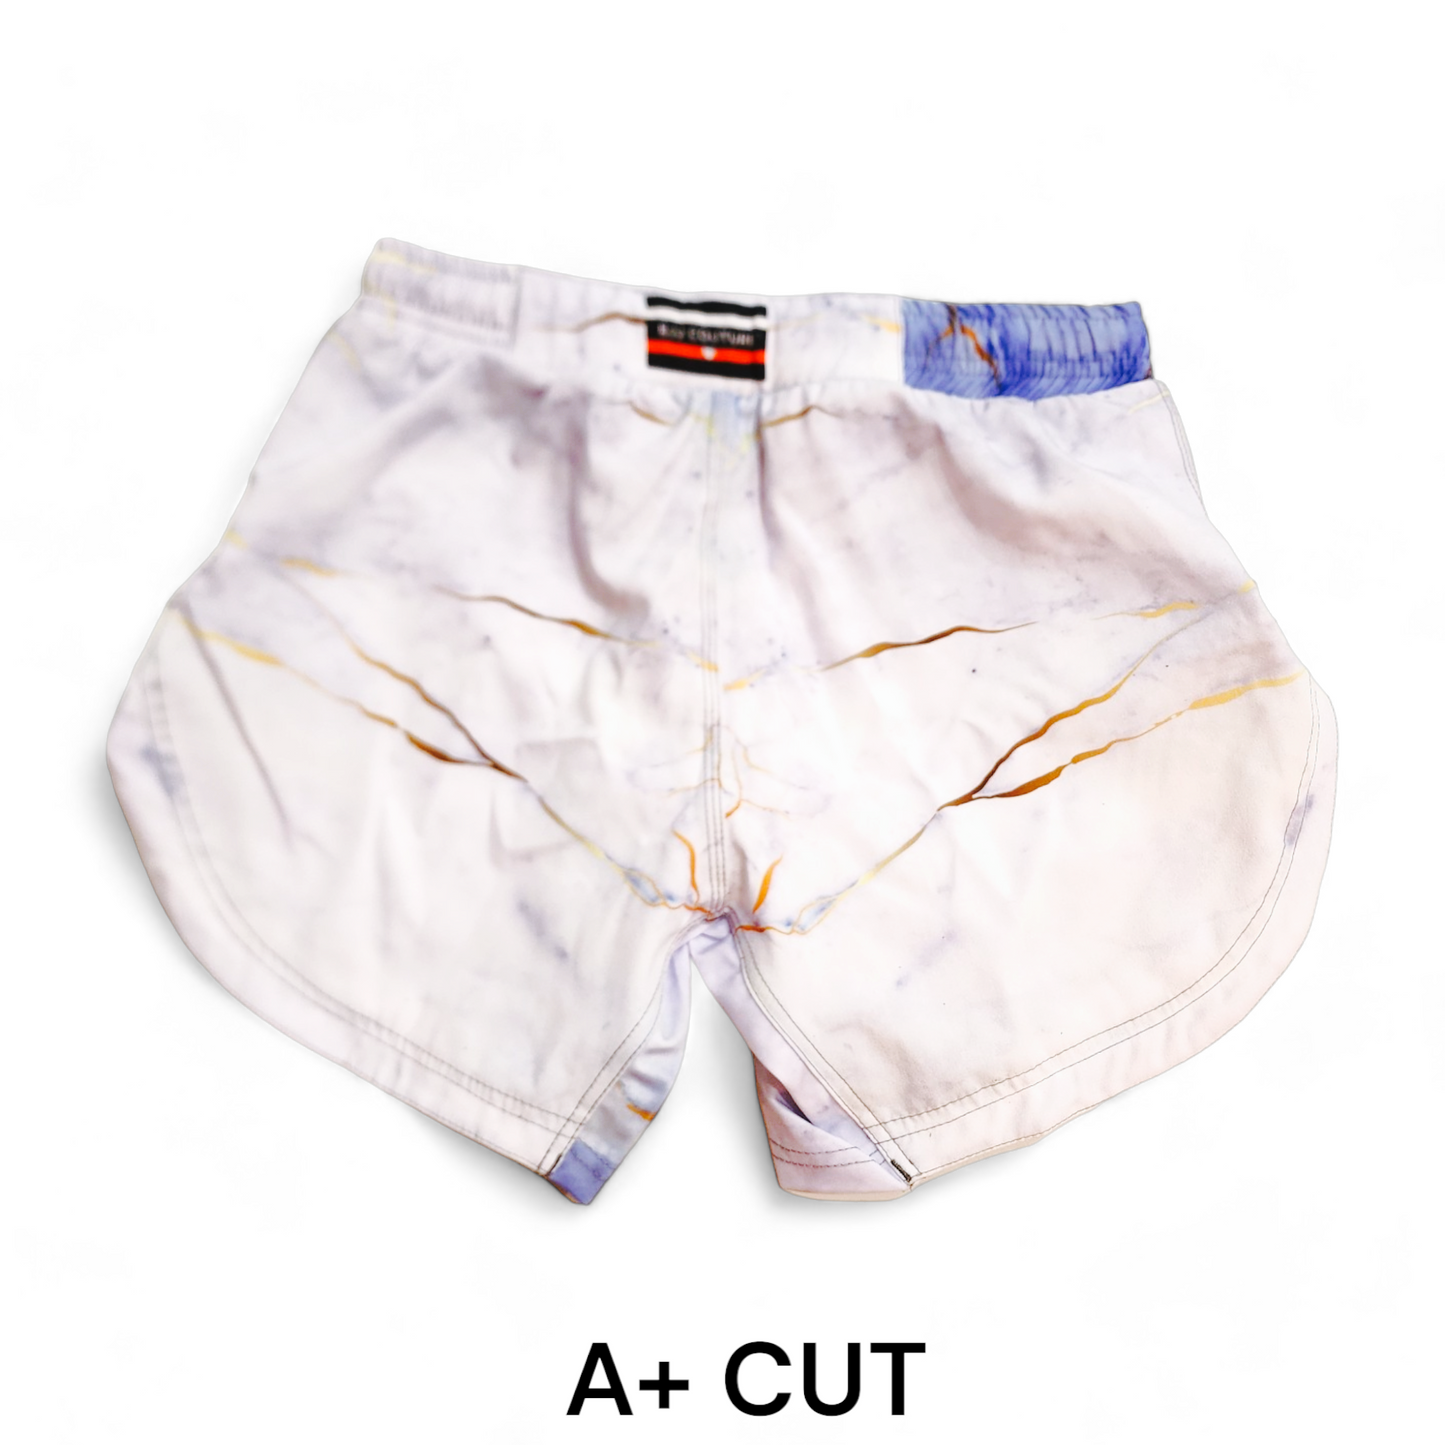 BJJ Couture White Marble Grappling Shorts with Blue and Gold veining